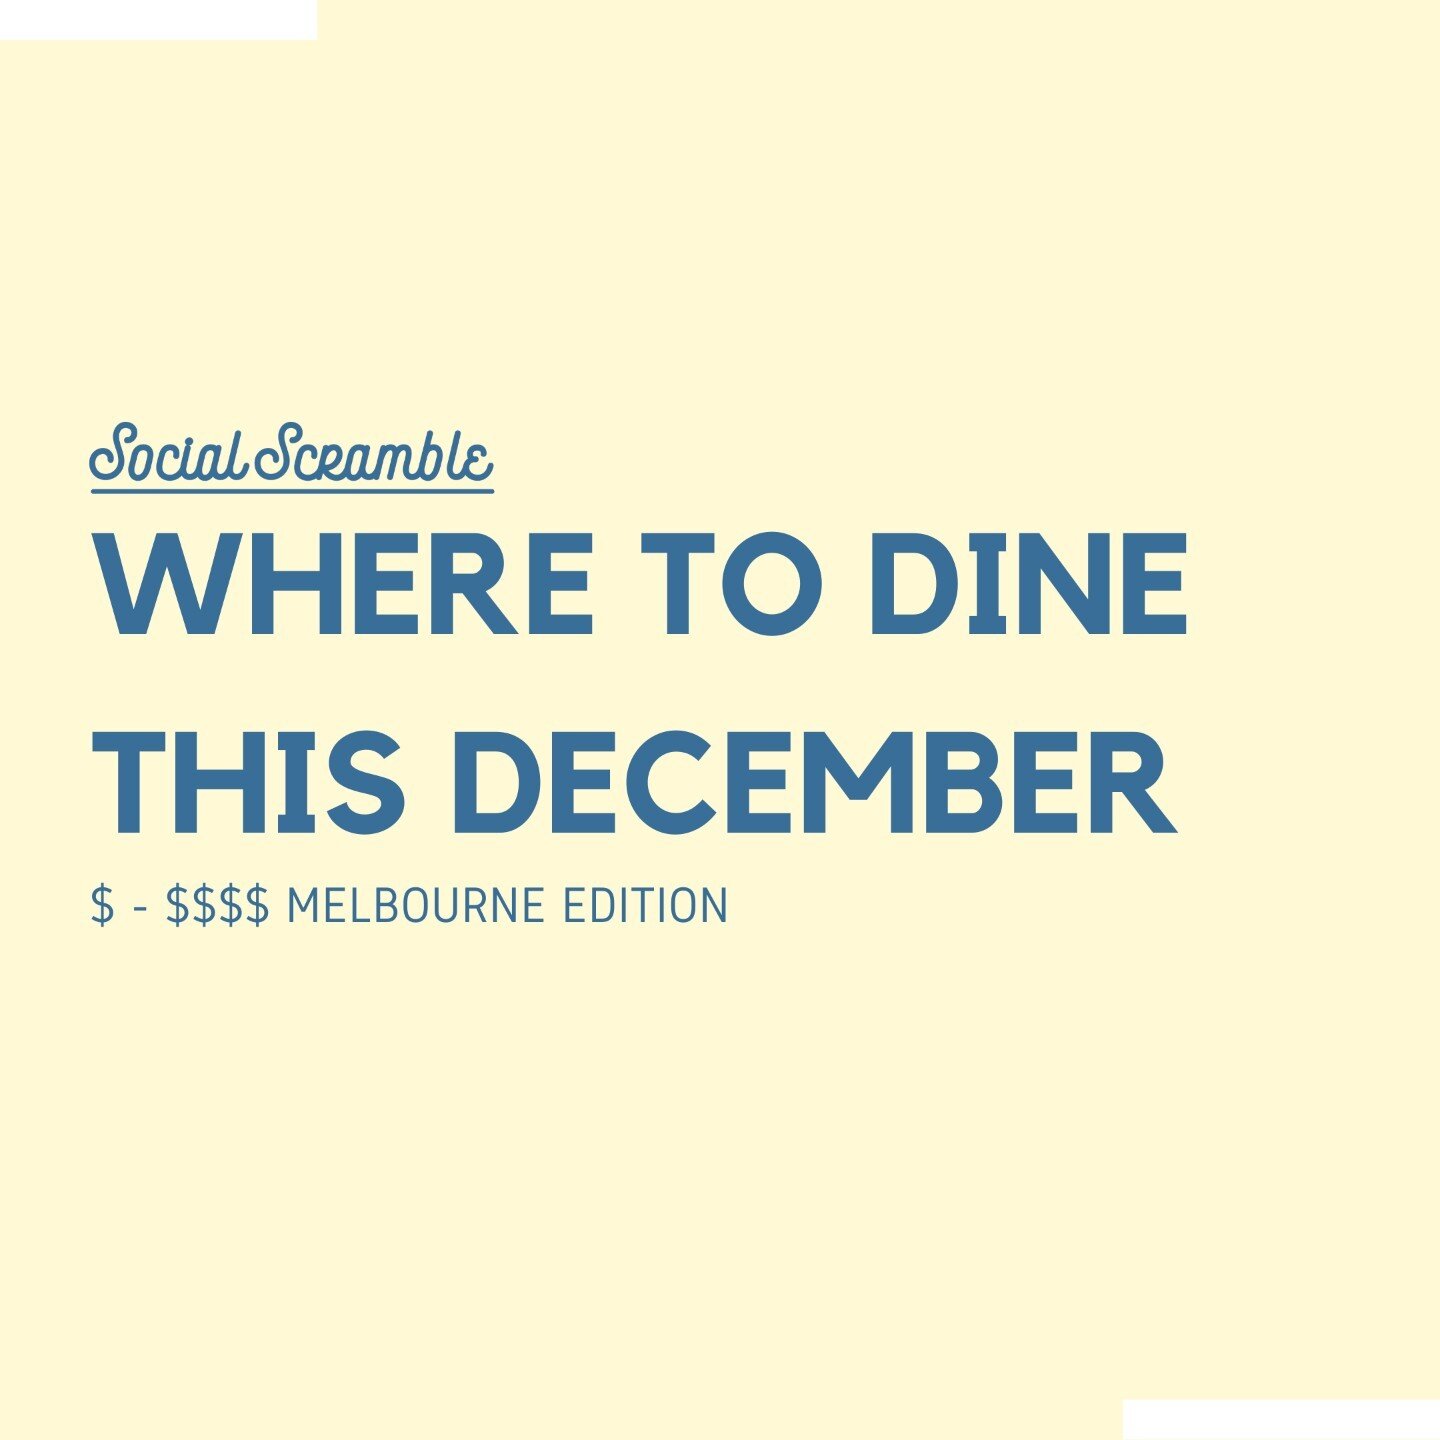 Need some restaurant recommendations for the holidays? We've got you covered! 

Four Melbourne venues, each one offering different types of cuisine with different price ranges. Take our advice &amp; thank us later! 😉 

-

#clientshoutout #clients #h